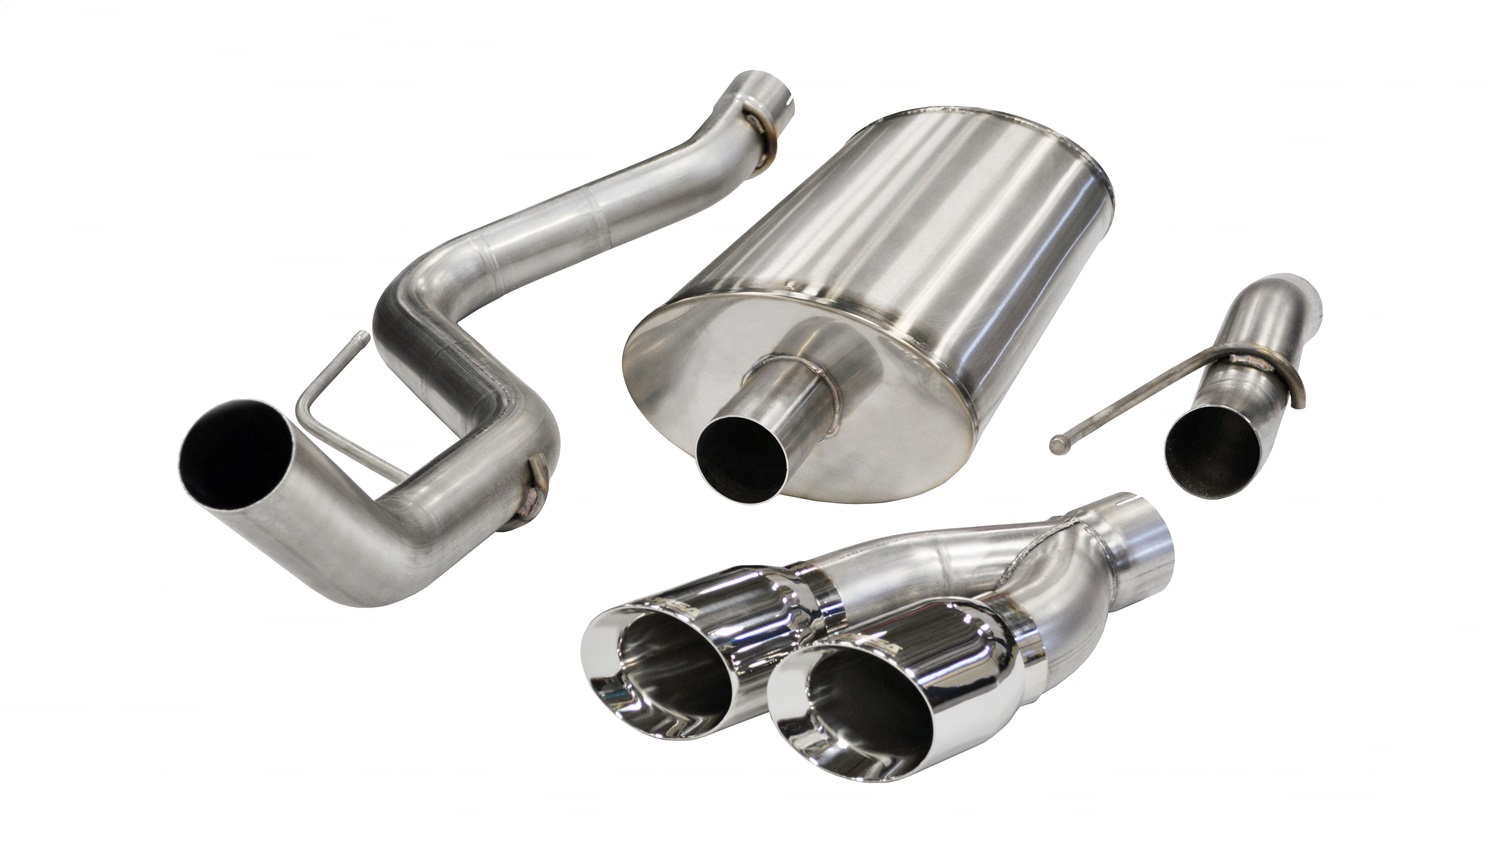 Corsa Performance Corsa Performance 14387 Sport Cat-Back Exhaust System Fits 11-14 F-150